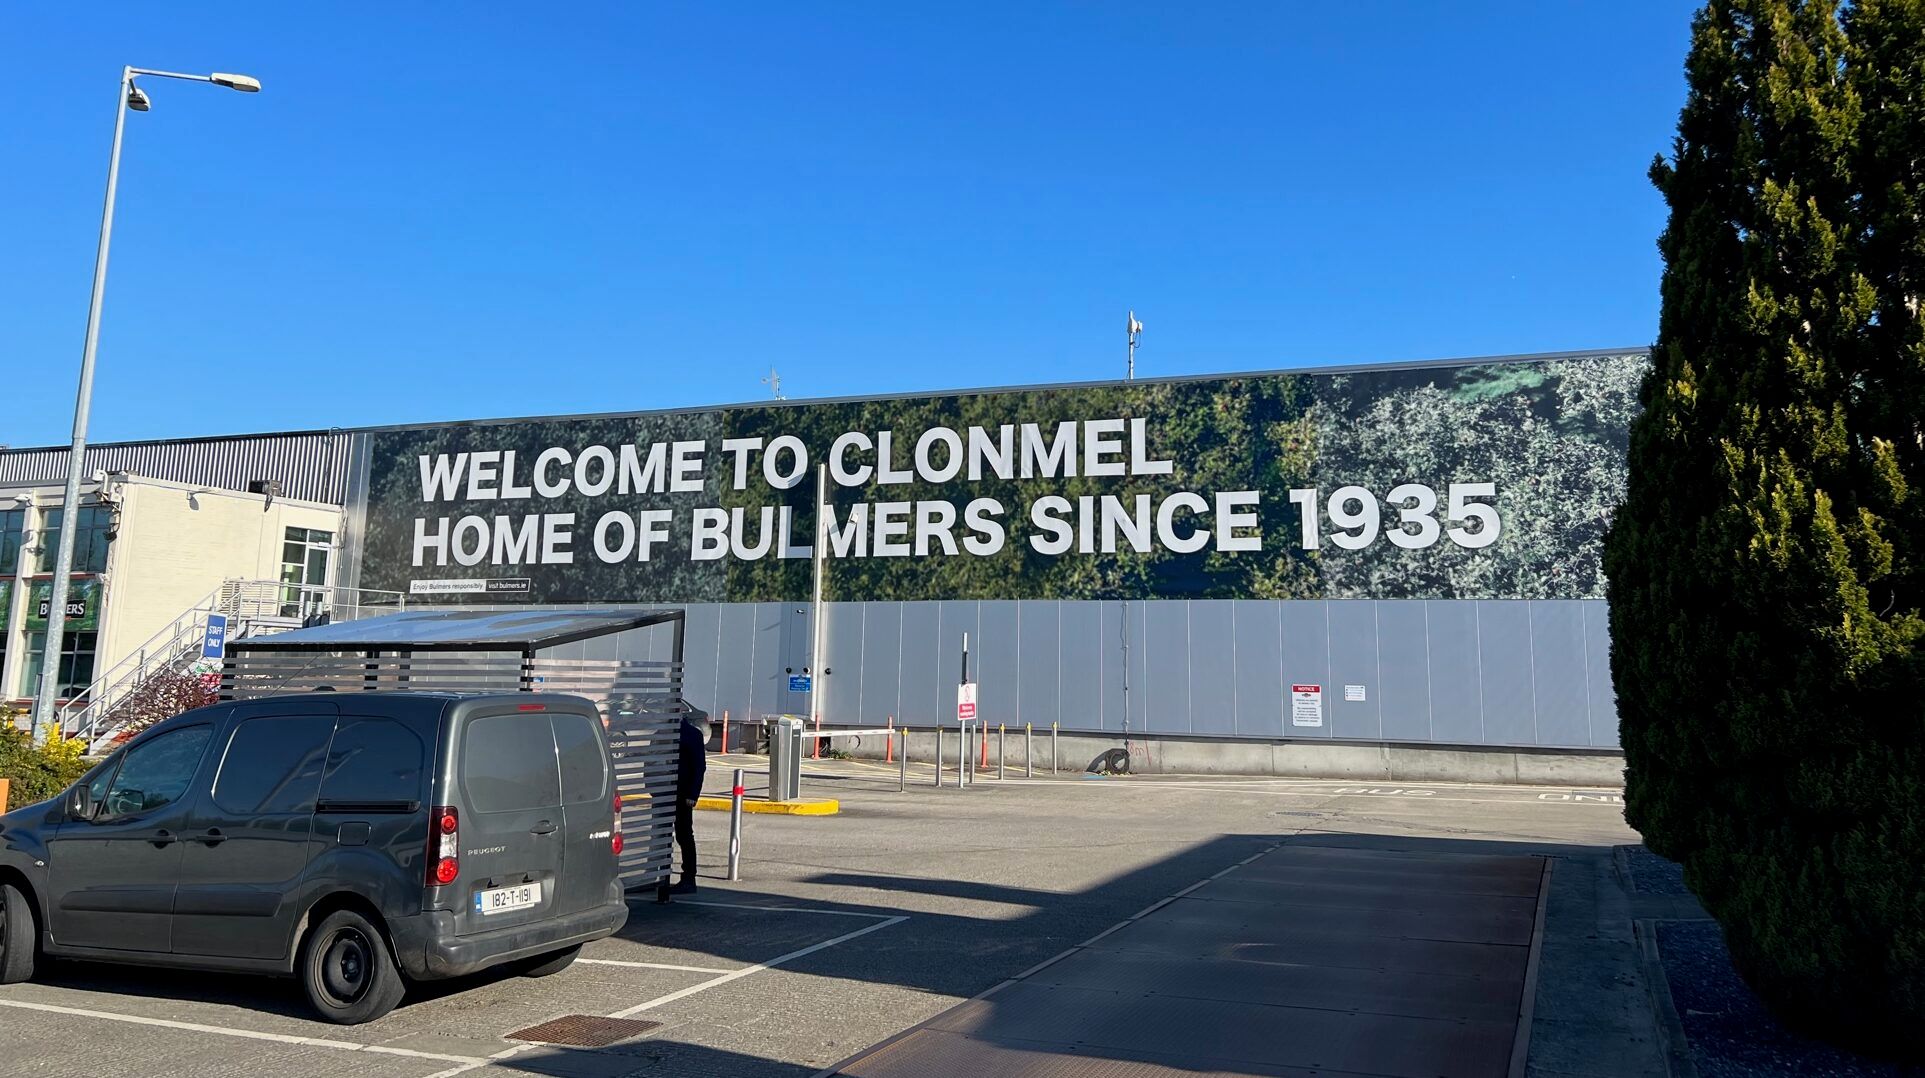 How Bulmers is leading the way for C&C’s environmental goals